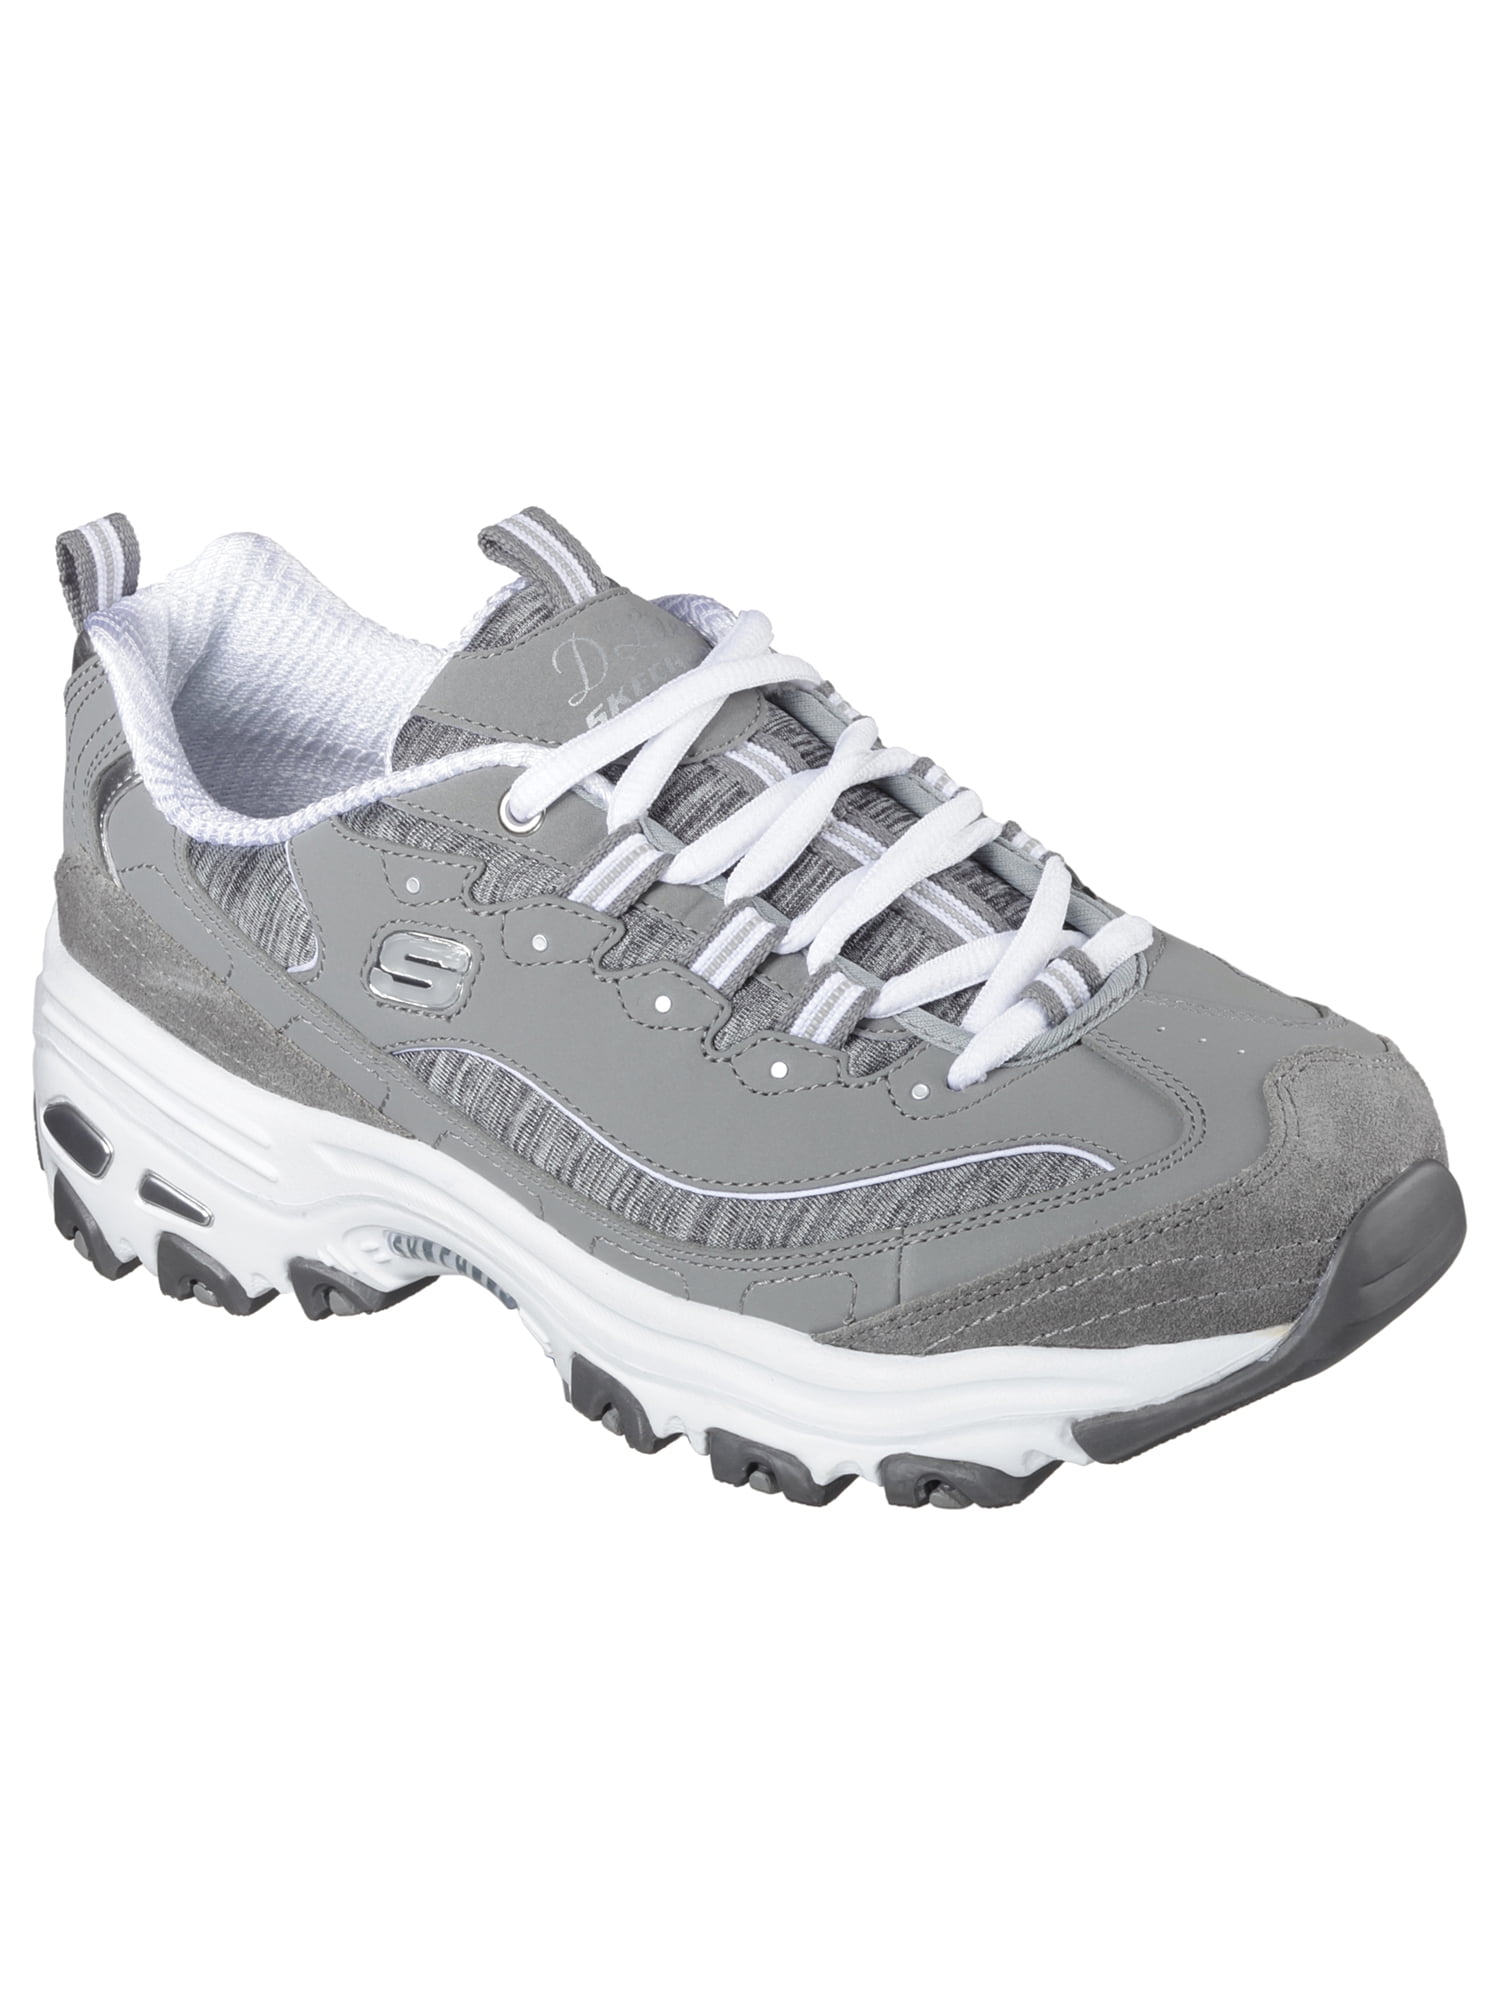 Skechers Women's Sport D'Lites Me Time Lace-up Comfort Athletic Sneaker, Wide Width Available -